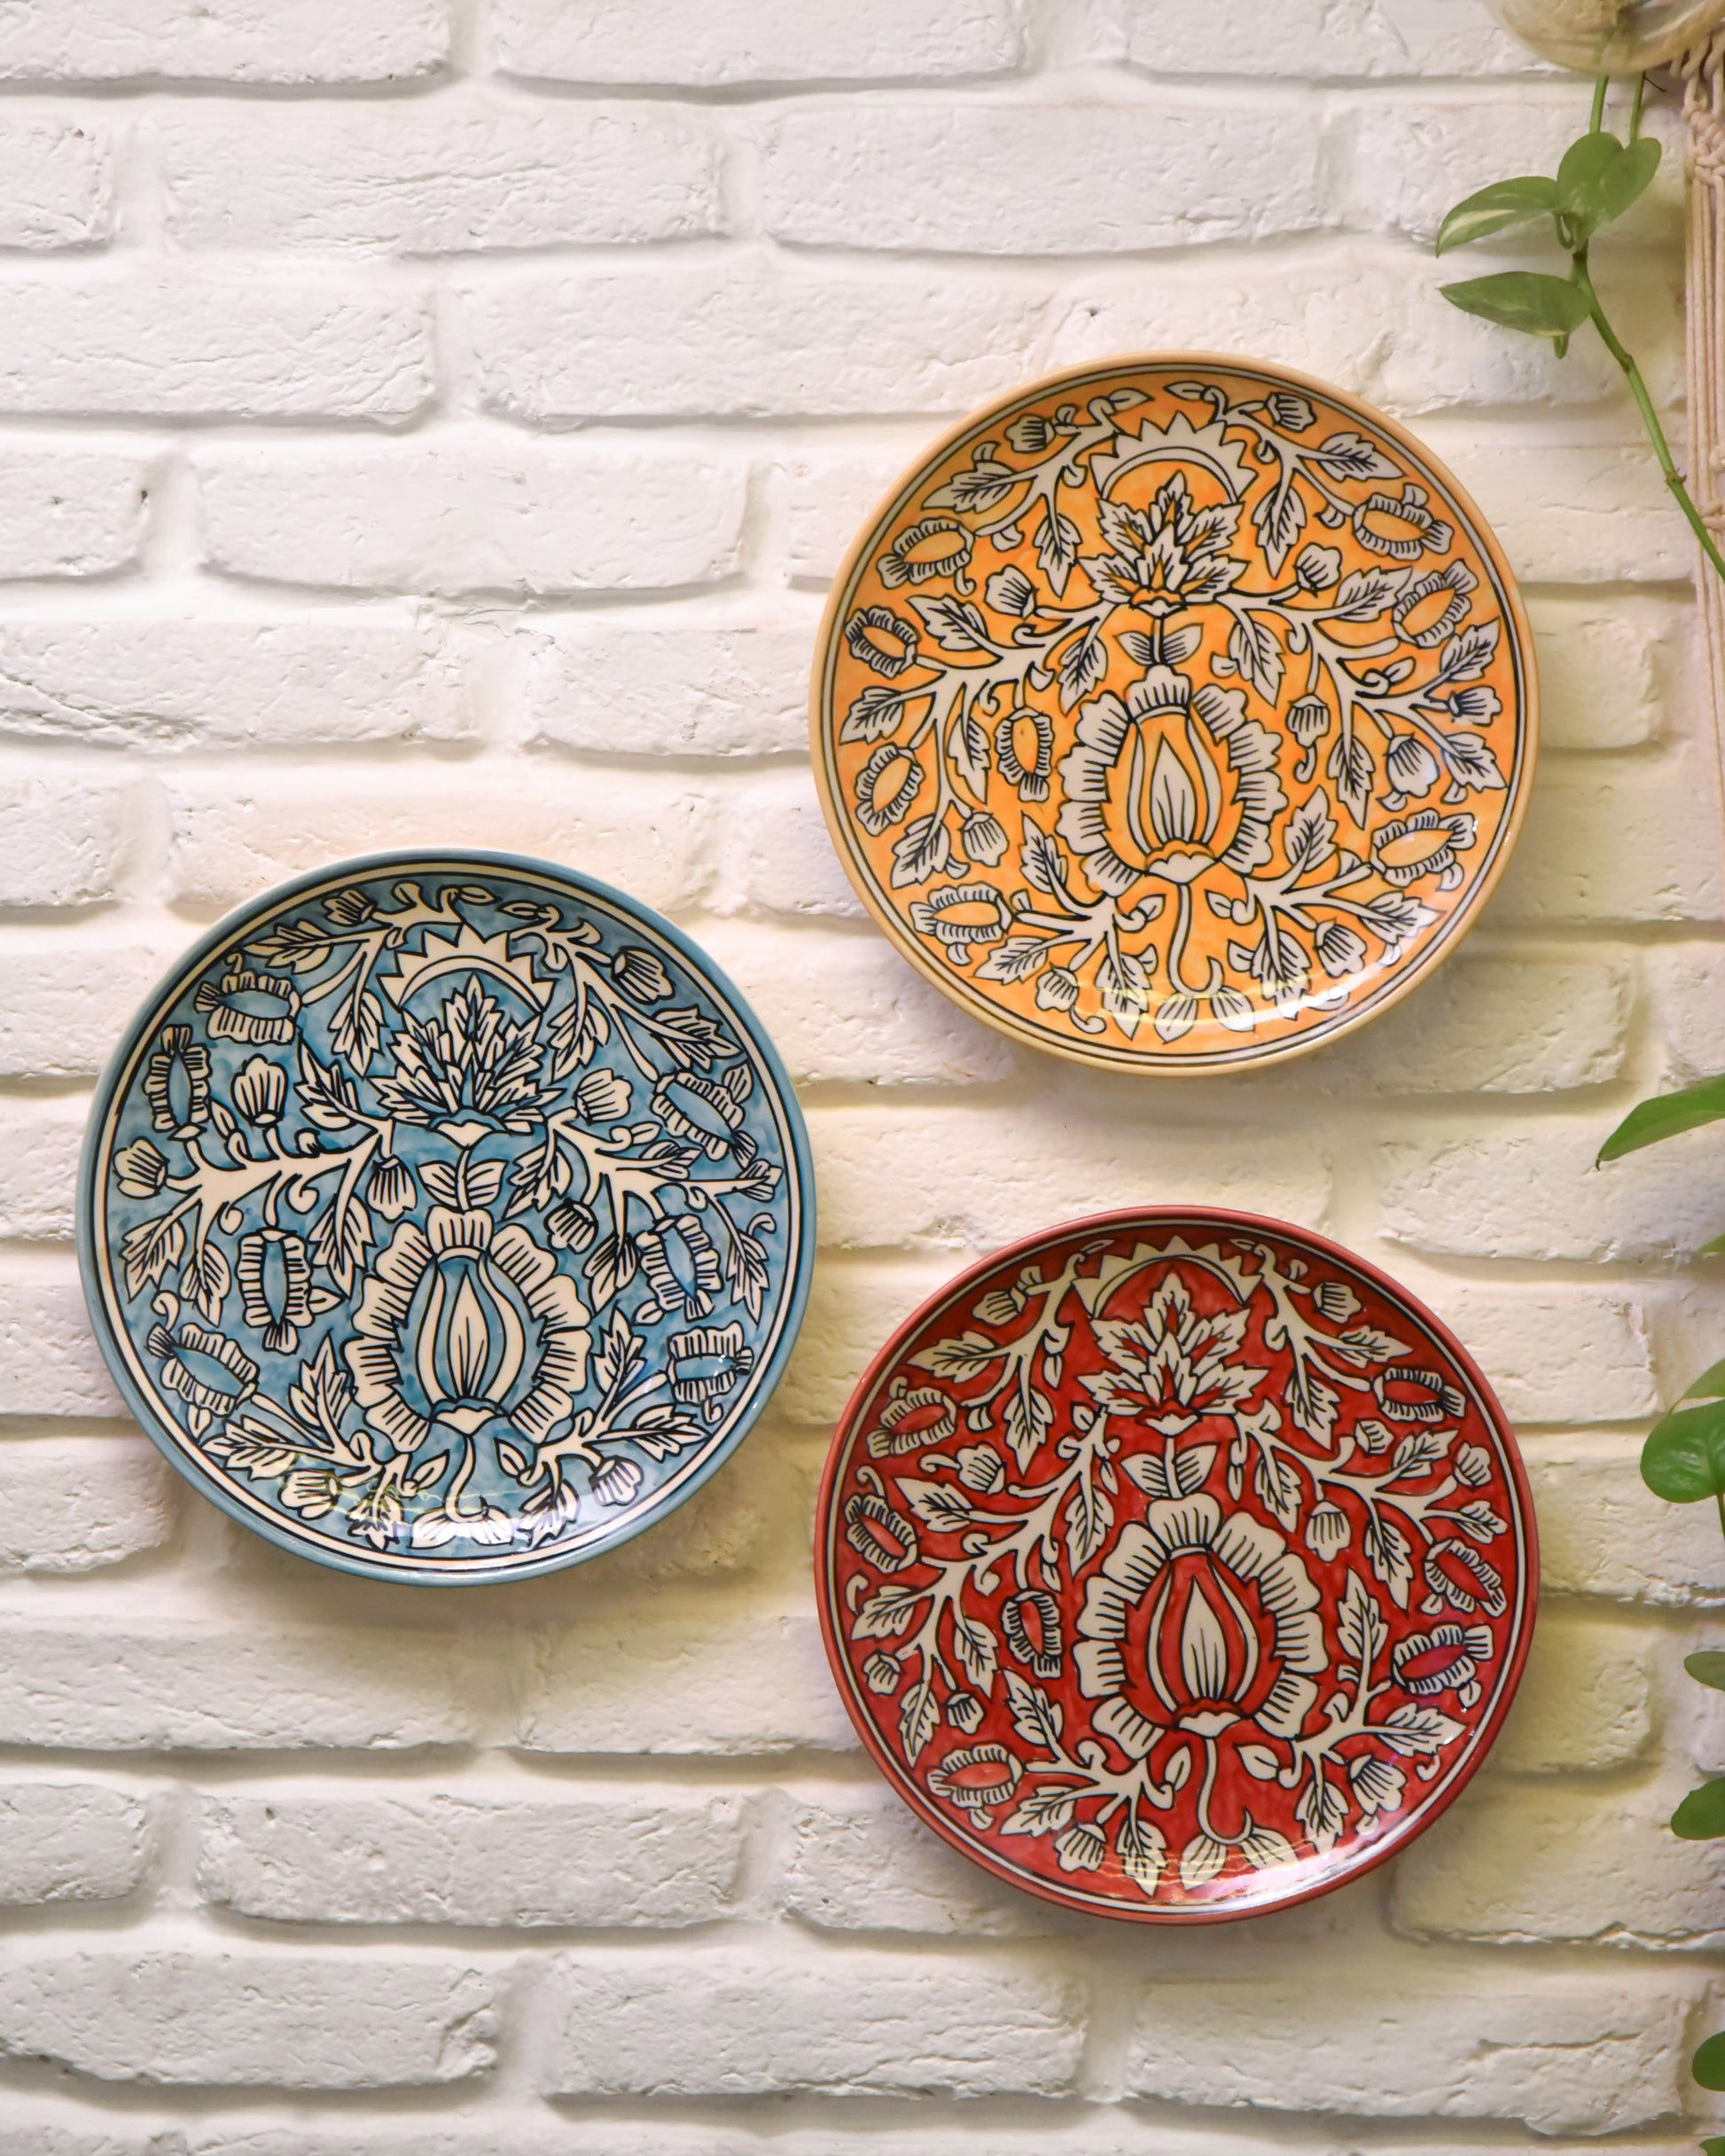  Artisanal Wall Plates, Bedroom Wall Décor, Classical Appeal Wall Décor, Decorative Wall Accents, Floral Wall Plate, Hand Painted Home Décor, Handcrafted Artisan Plates, Handmade Wall Décor, Home Accent Pieces, Indian Artisan Craft, Living Room Décor, Red Flower Hanging Wall Plate, Unique Wall Accent Pieces, Vibrant Wall Plates Set, Wall Hanging Plate, Tesu